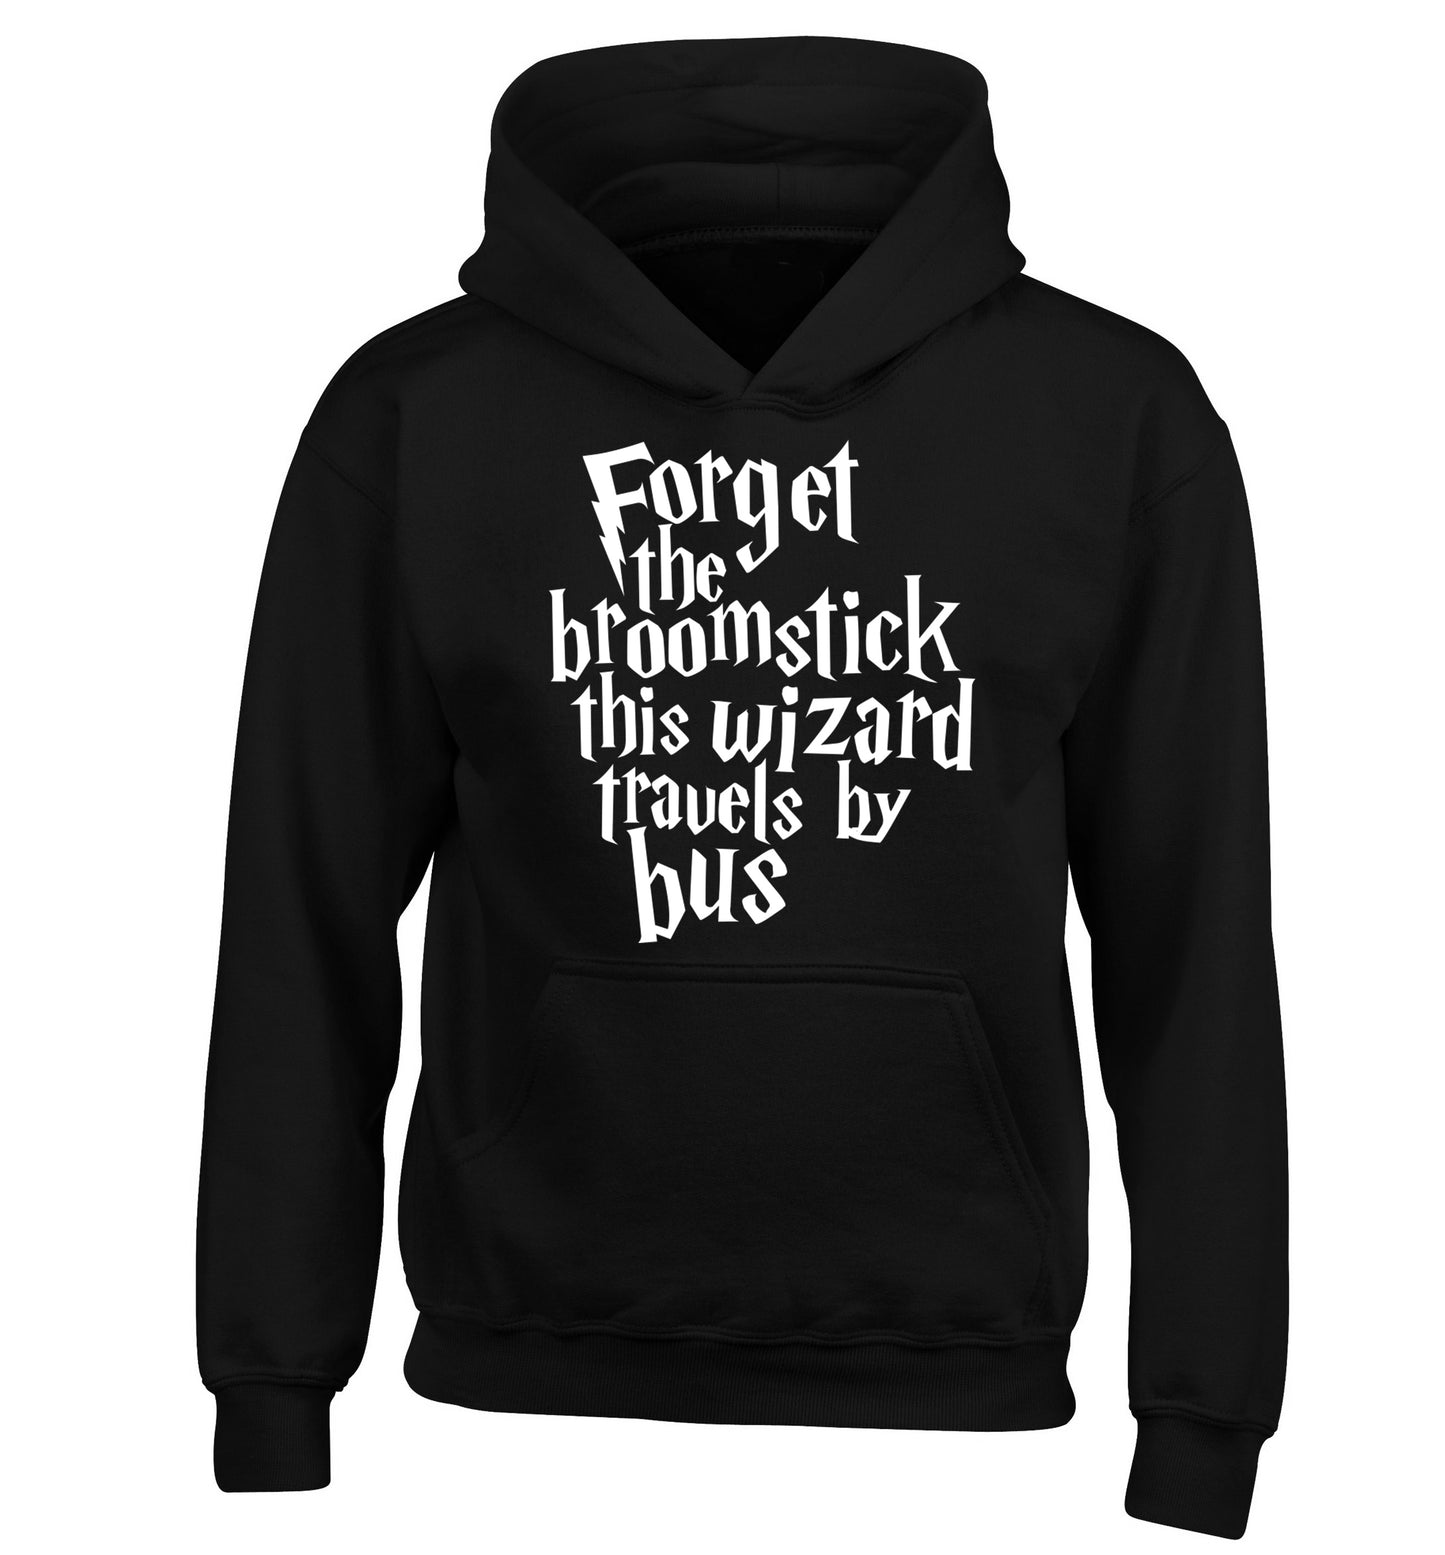 Forget the broomstick this wizard travels by bus children's black hoodie 12-14 Years